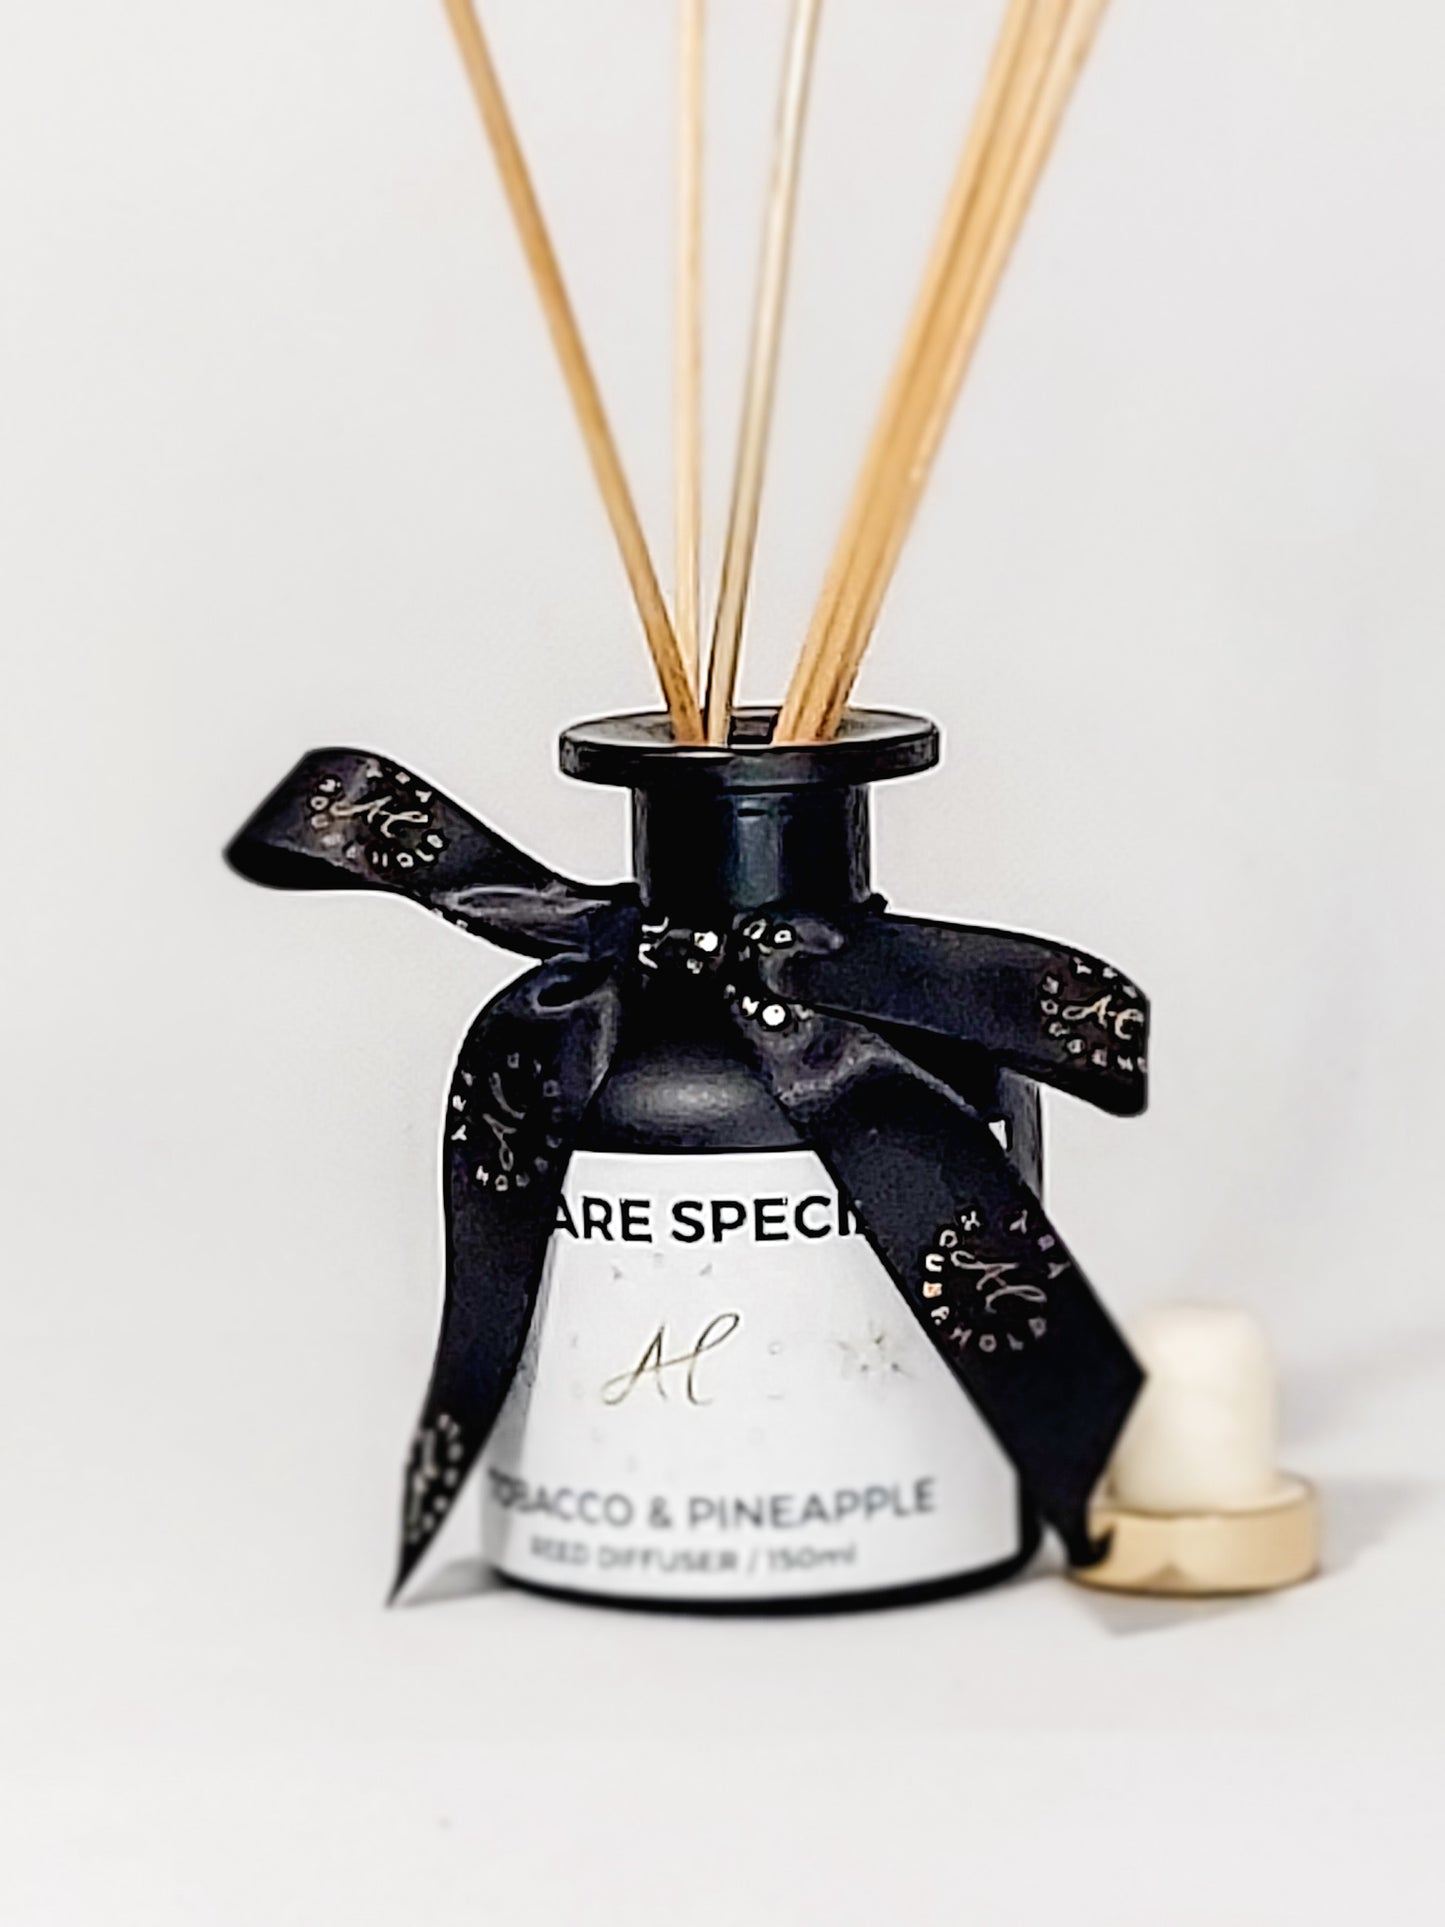 You are Special Luxury Reed Diffuser